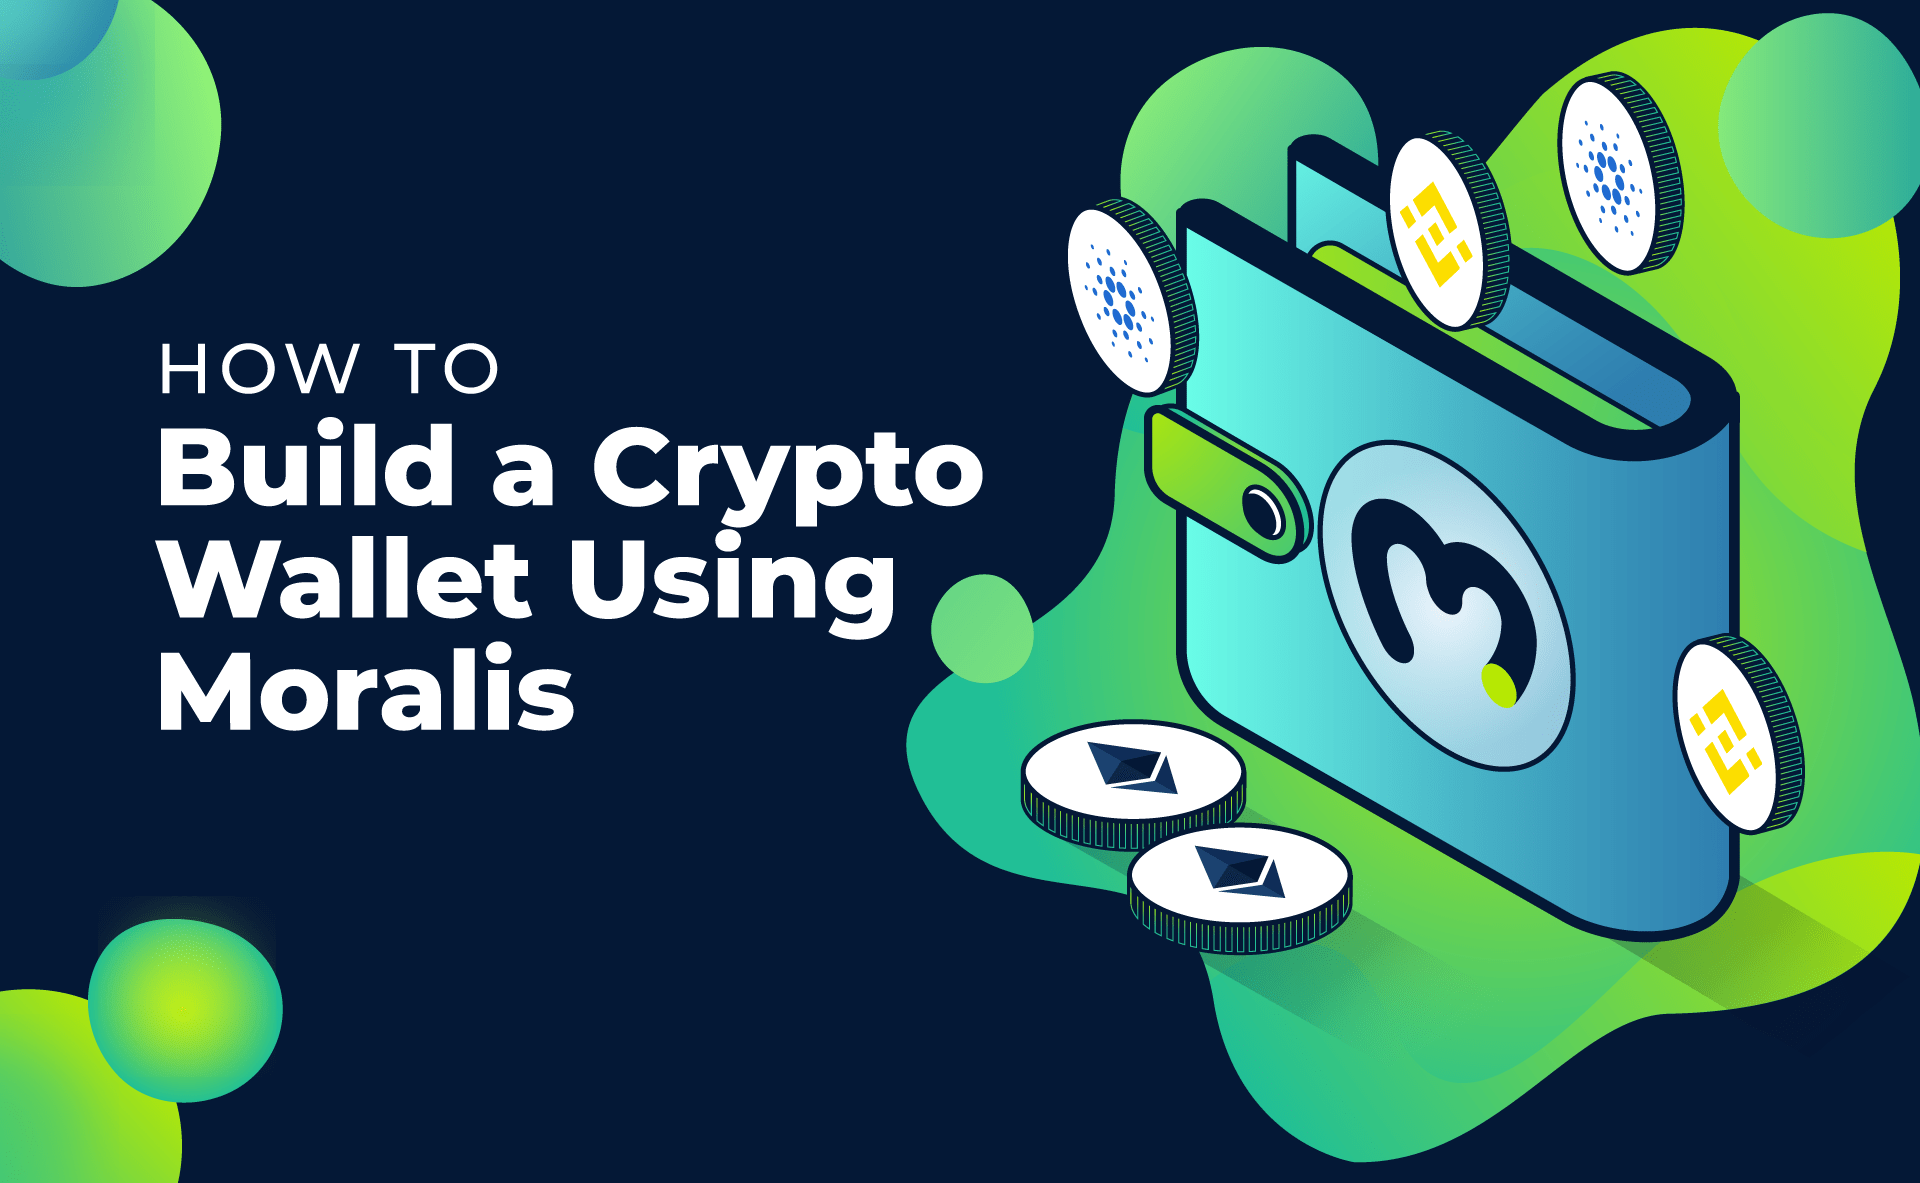 How to build crypto wallet accept payments with bitcoin